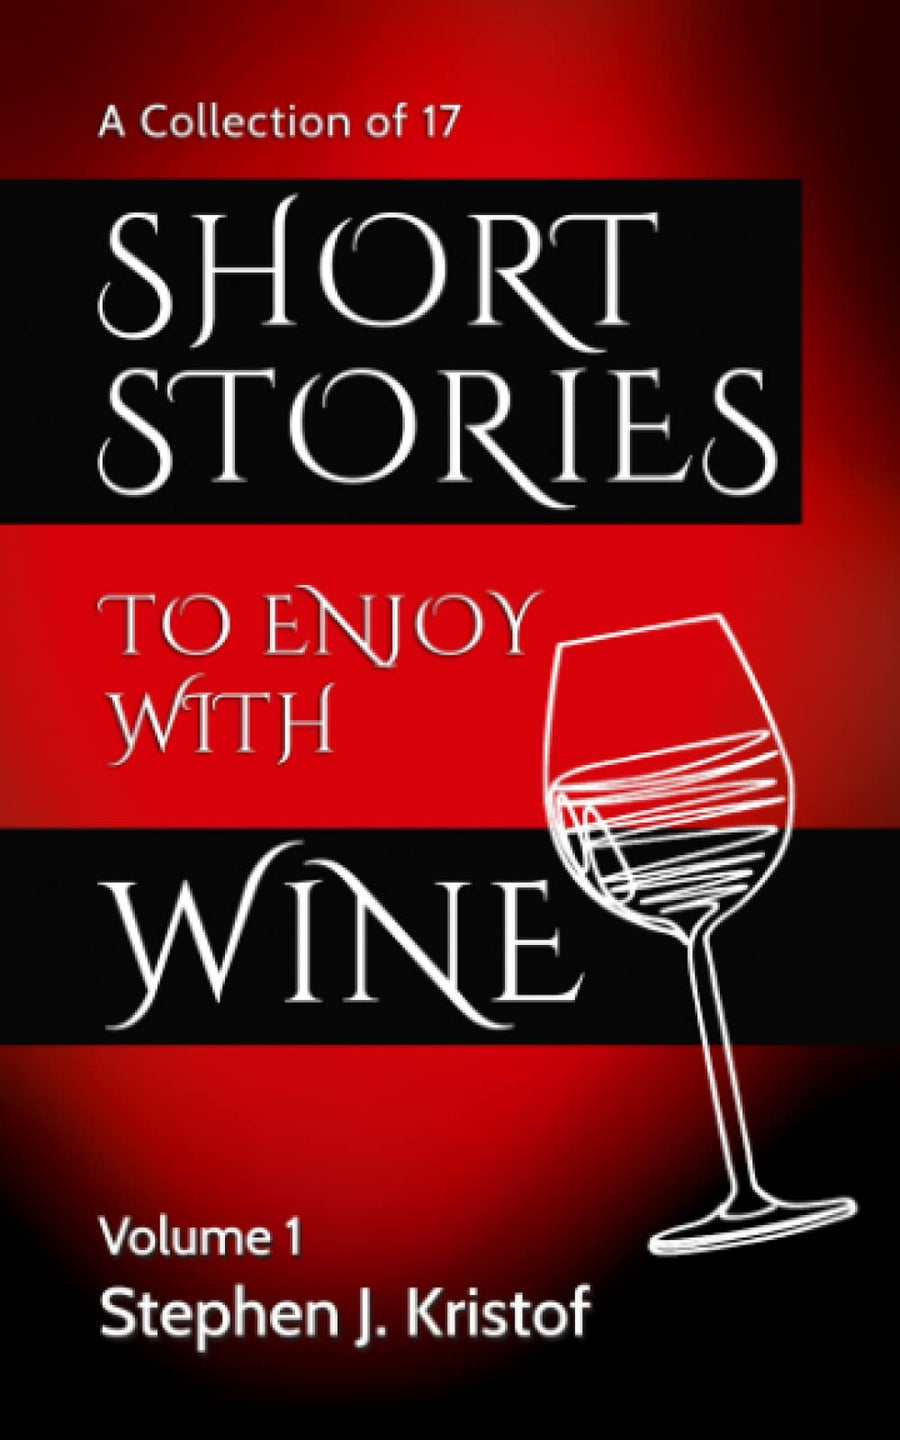 Short Stories To Enjoy With Wine